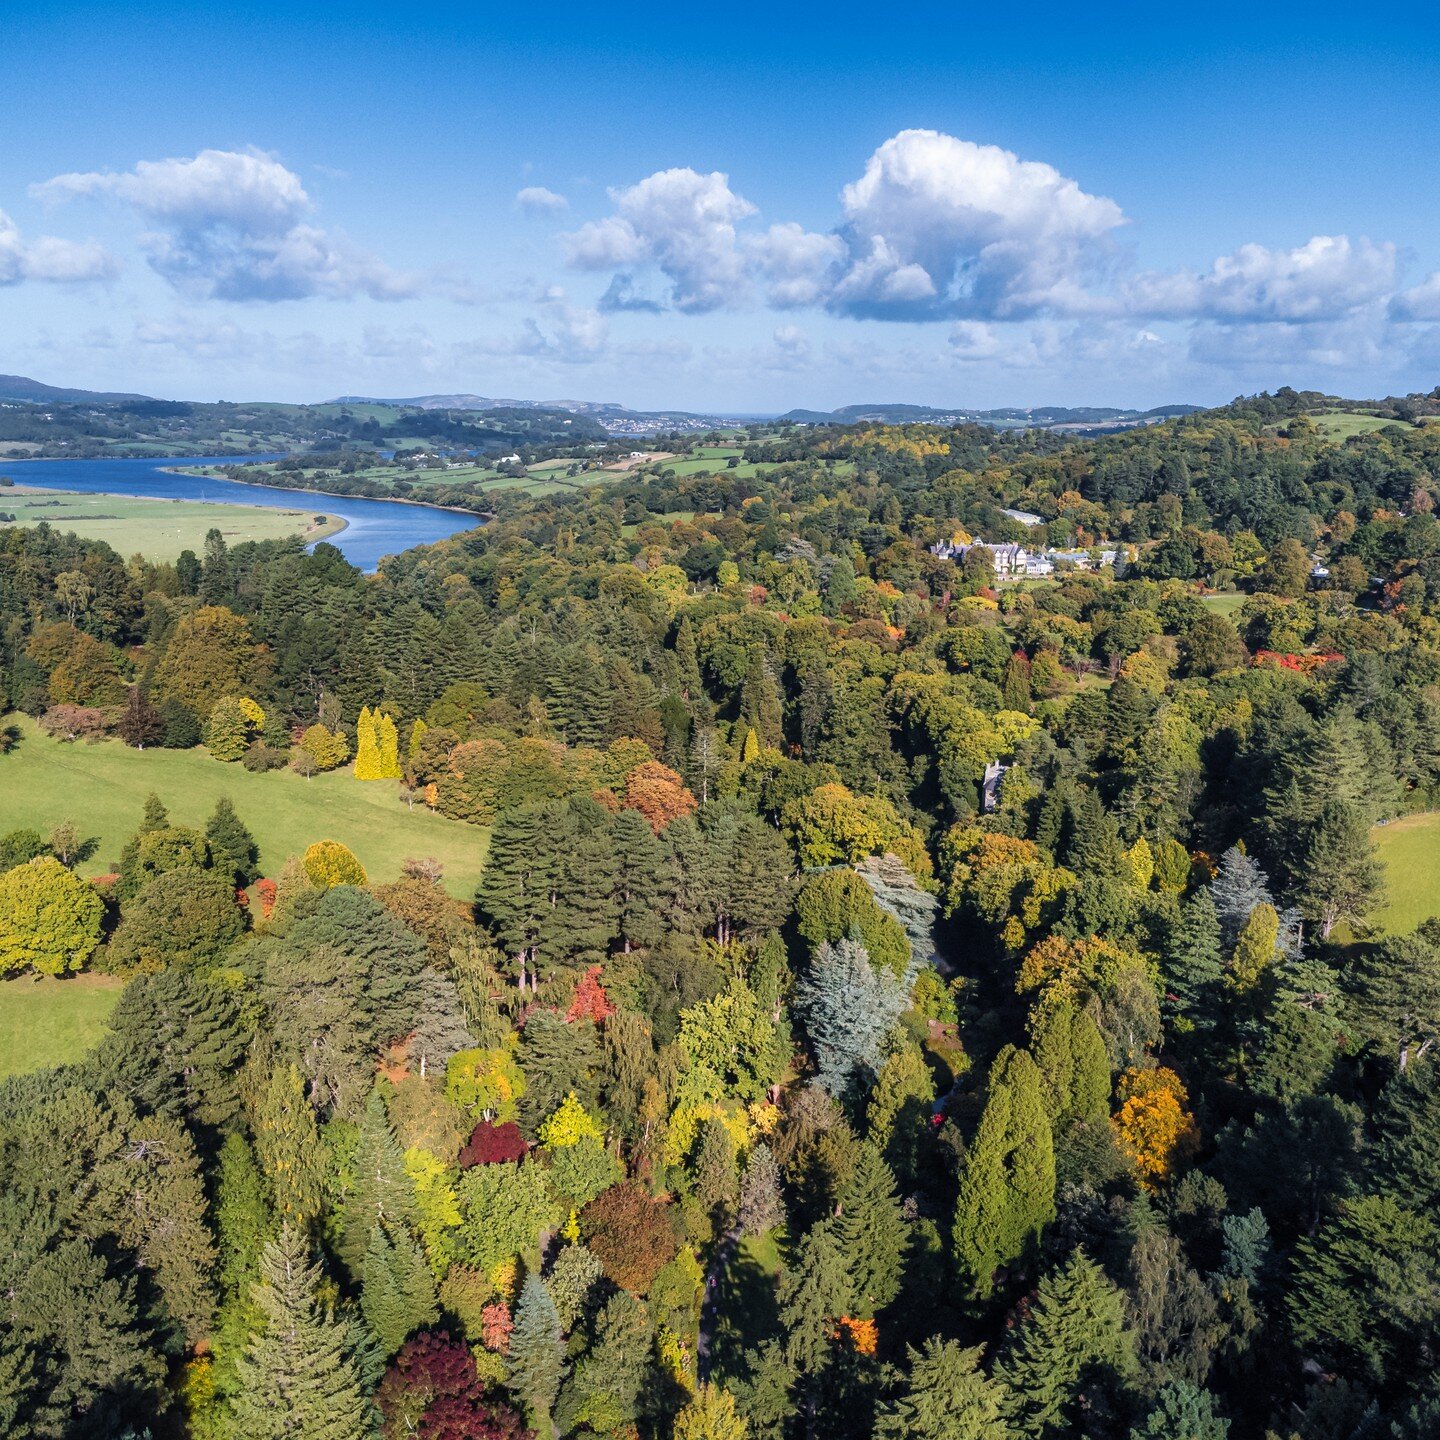 The magnificent National Trust Bodnant Gardens from the air, with the river Conwy snaking itself away towards the mouth of the Conwy estuary in the distance
-
-
-
-
-
#bodnantgardens 
#bodnantgarden 
#nationaltrust 
#nationaltrustmember 
#djimini2 
#